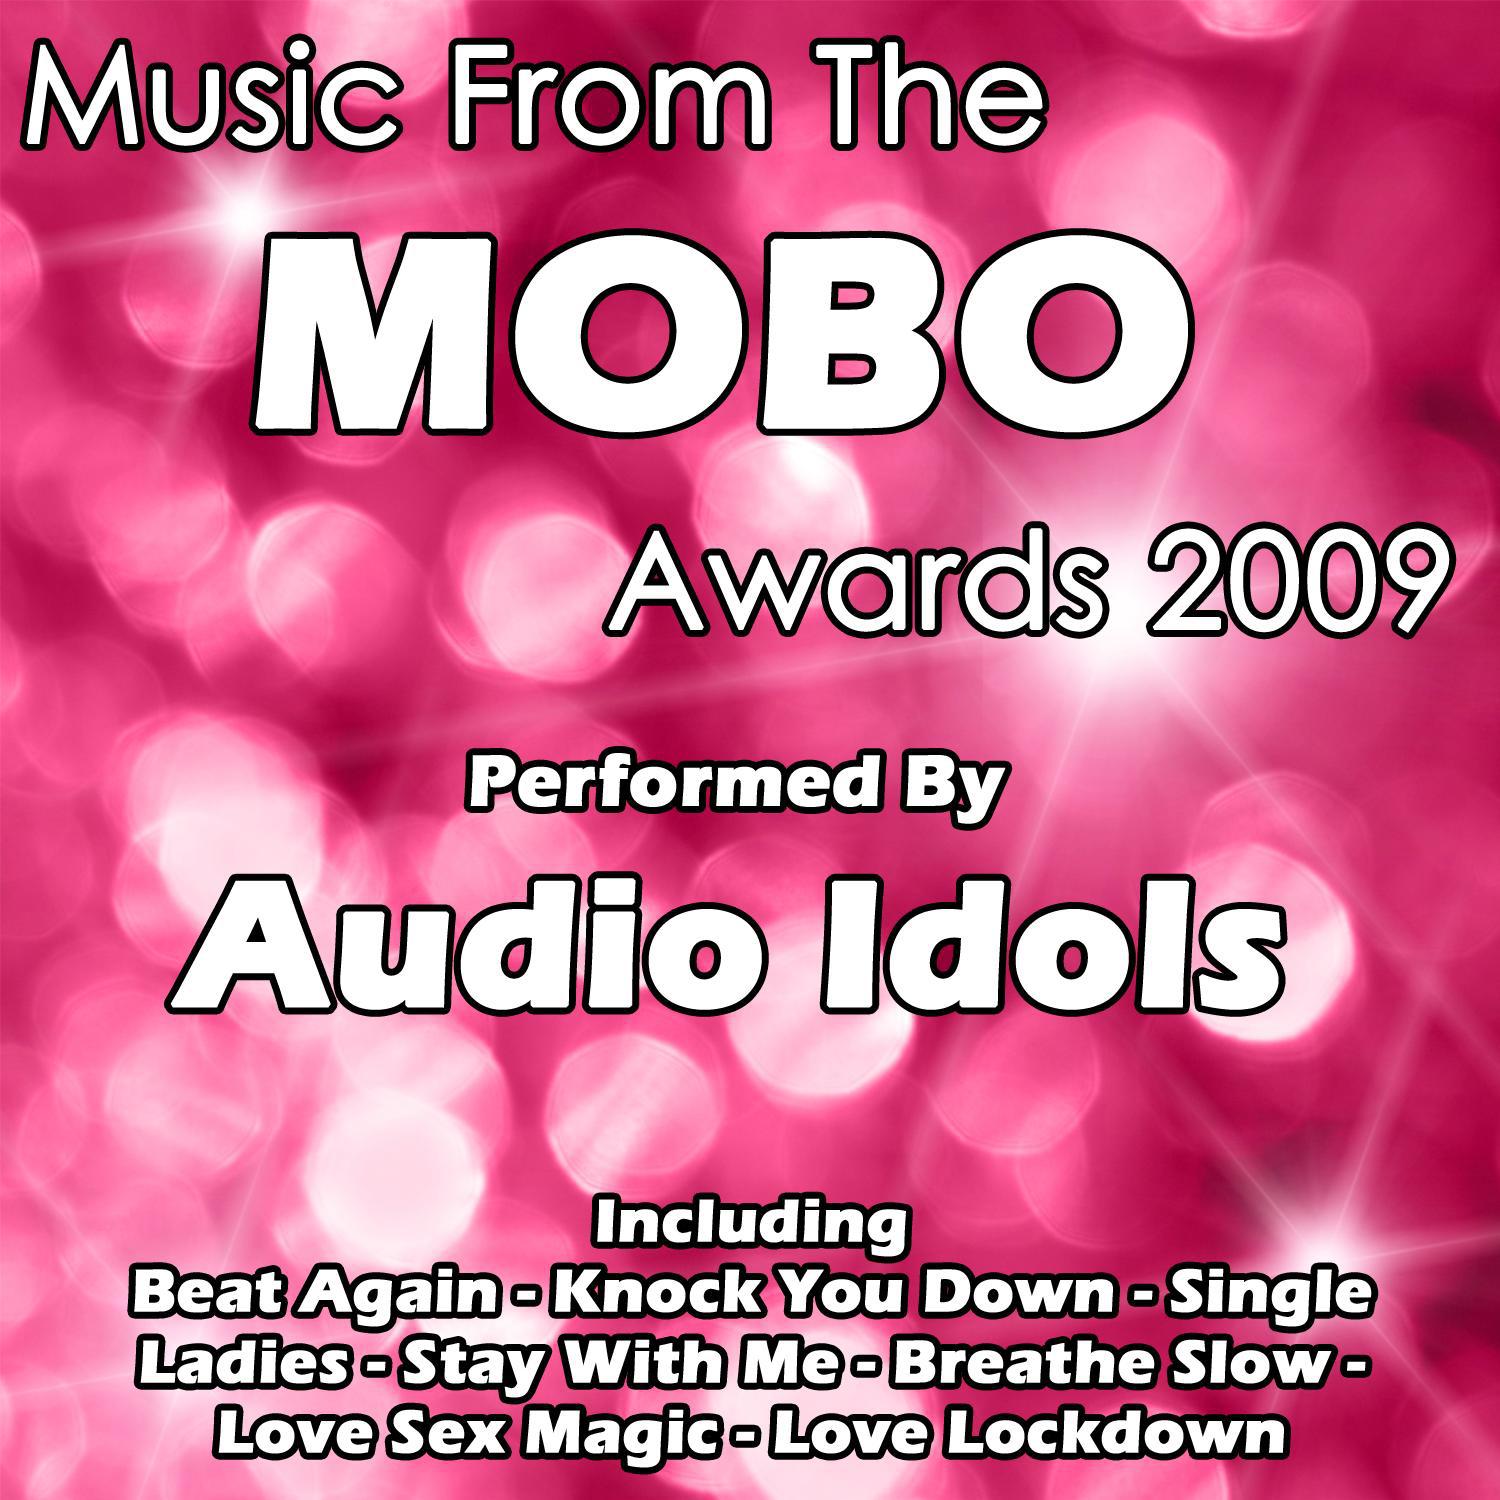 Music From: MOBO Awards 2009